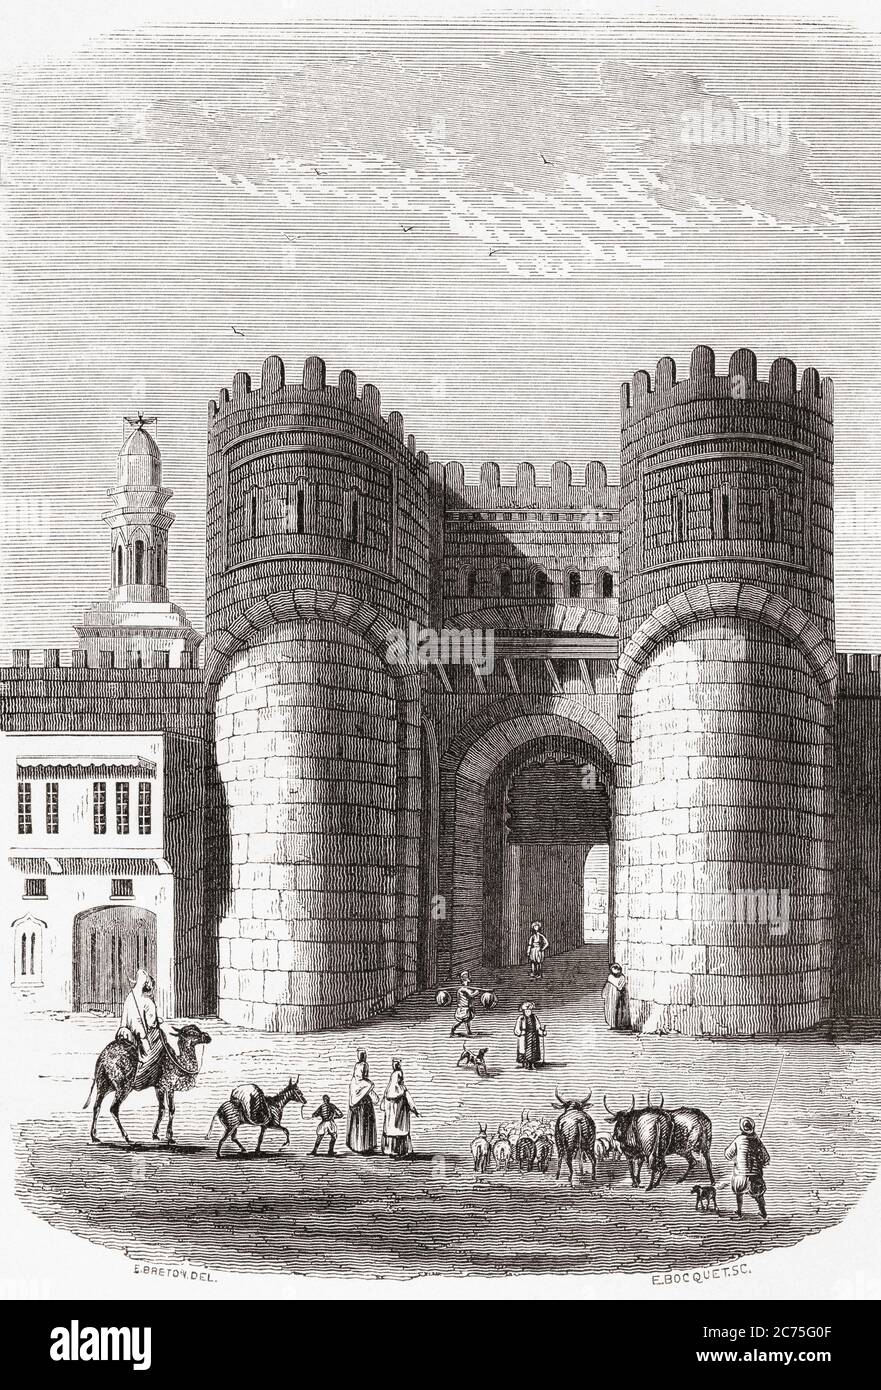 The Bab al Futuh (Conquest Gate), old city of Cairo, Egypt, seen here in the 19th century.  From Monuments de Tous les Peuples, published 1843. Stock Photo